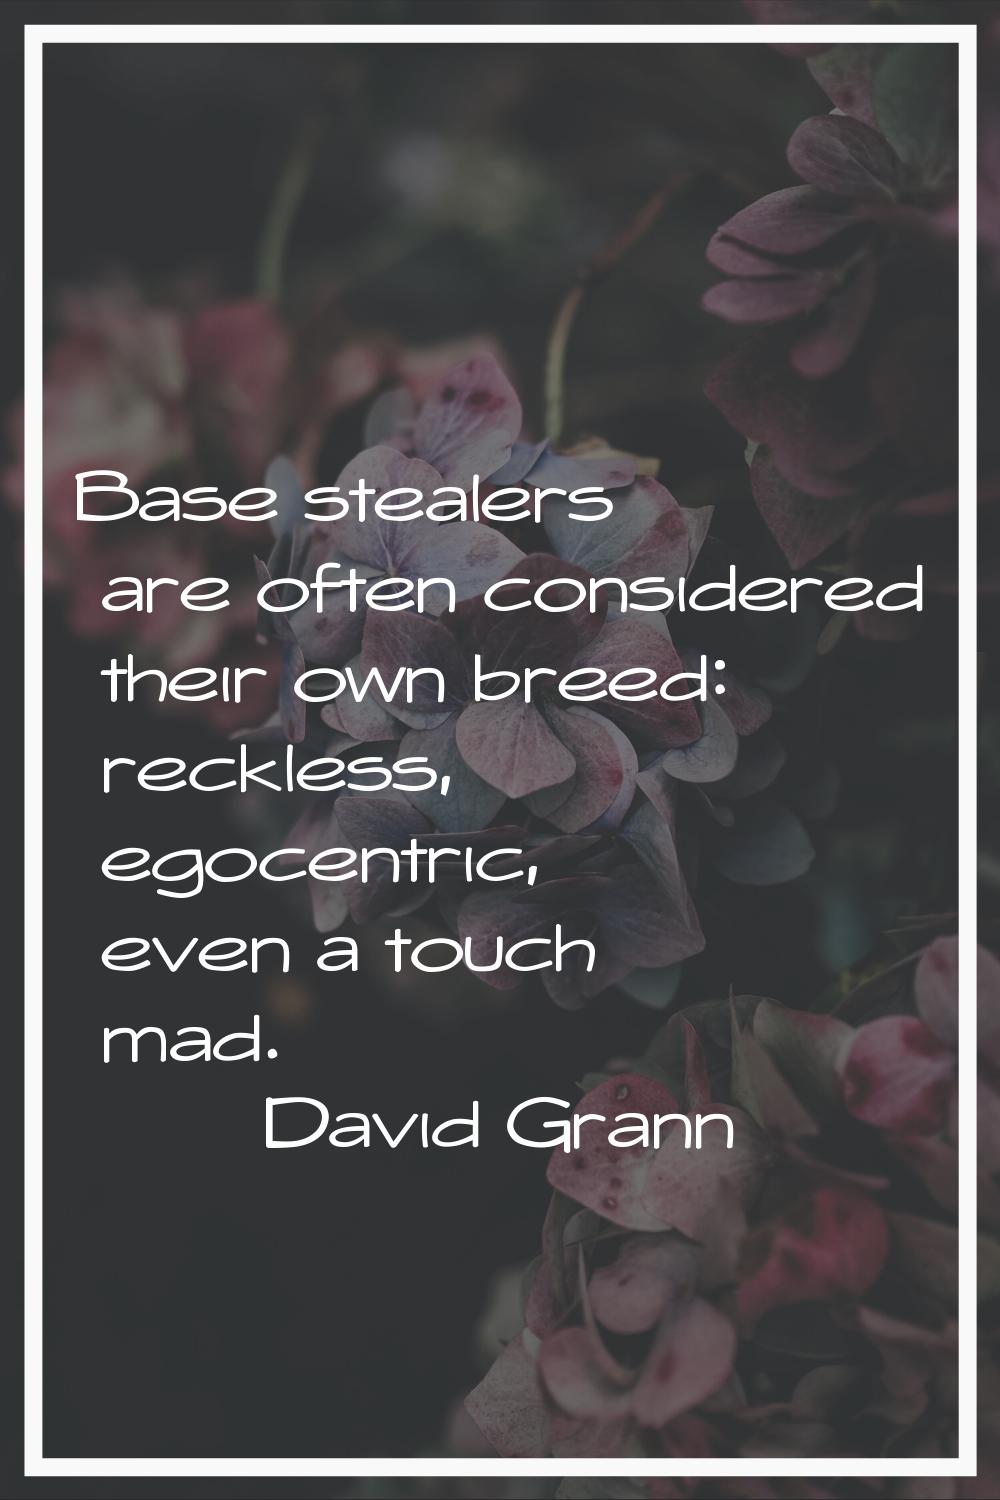 Base stealers are often considered their own breed: reckless, egocentric, even a touch mad.